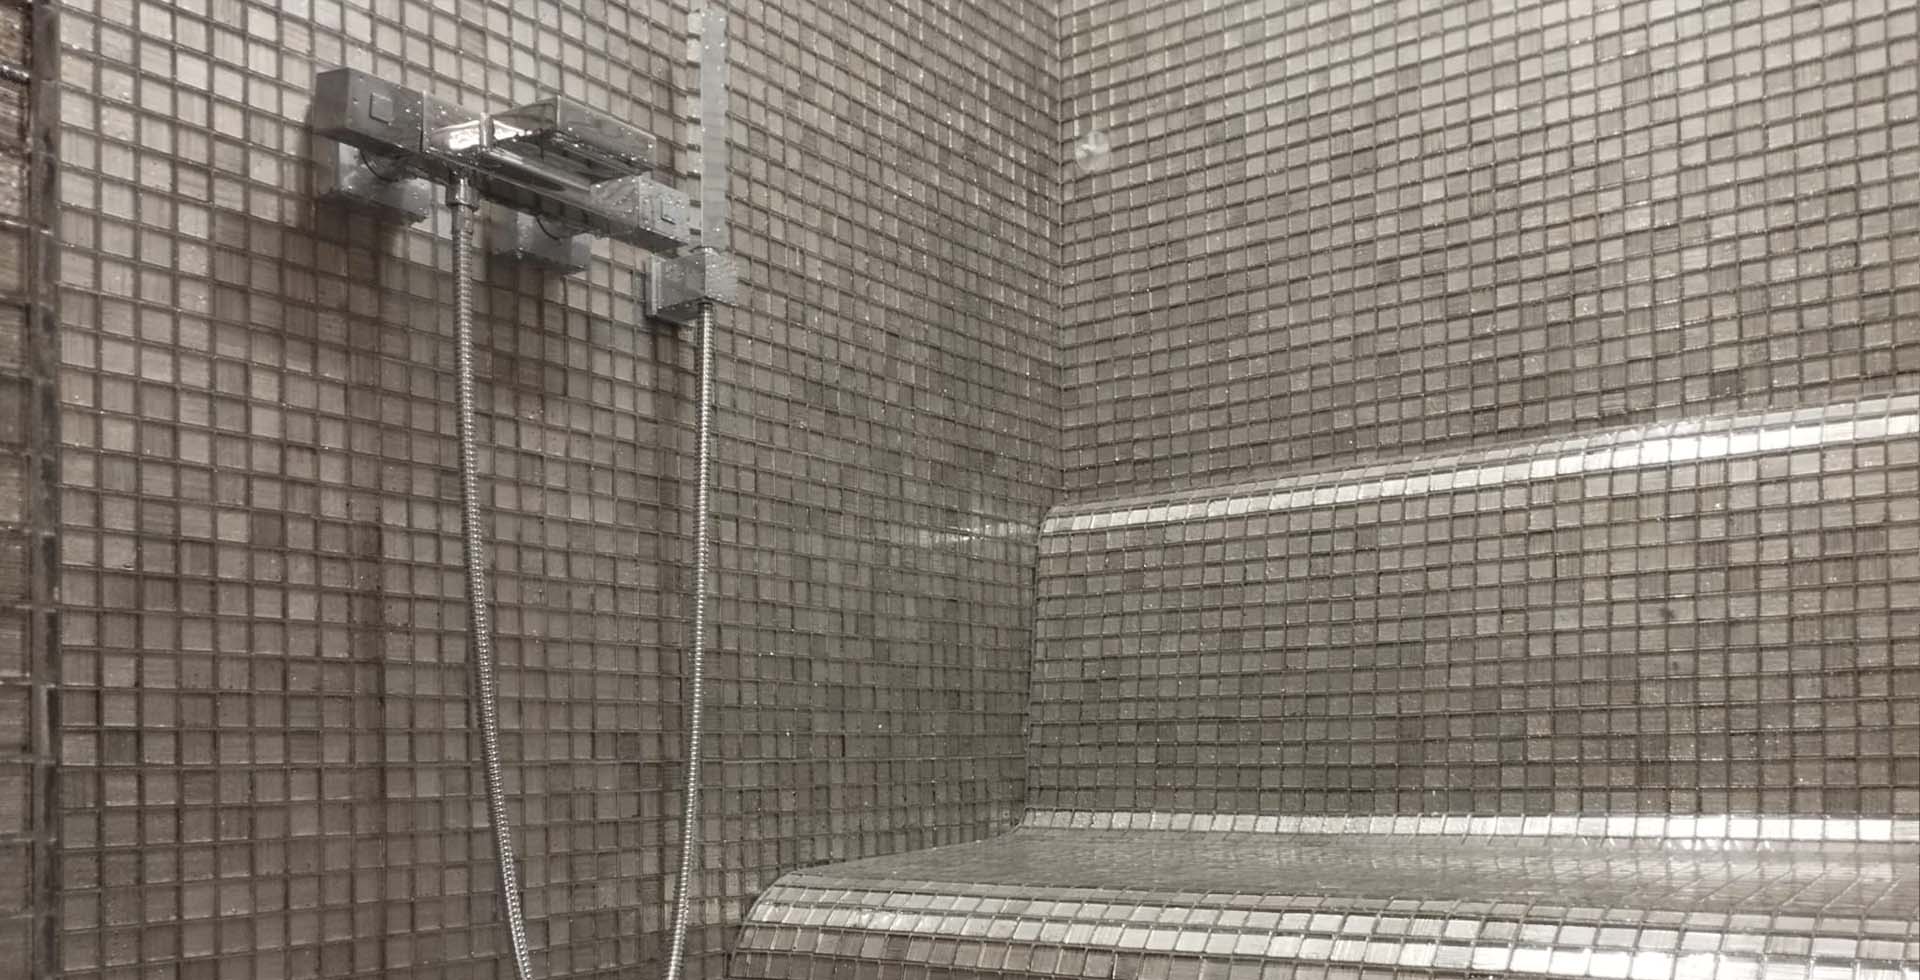 Indulge in luxury with our Abu Dhabi steam room design – available for purchase at an affordable cost.